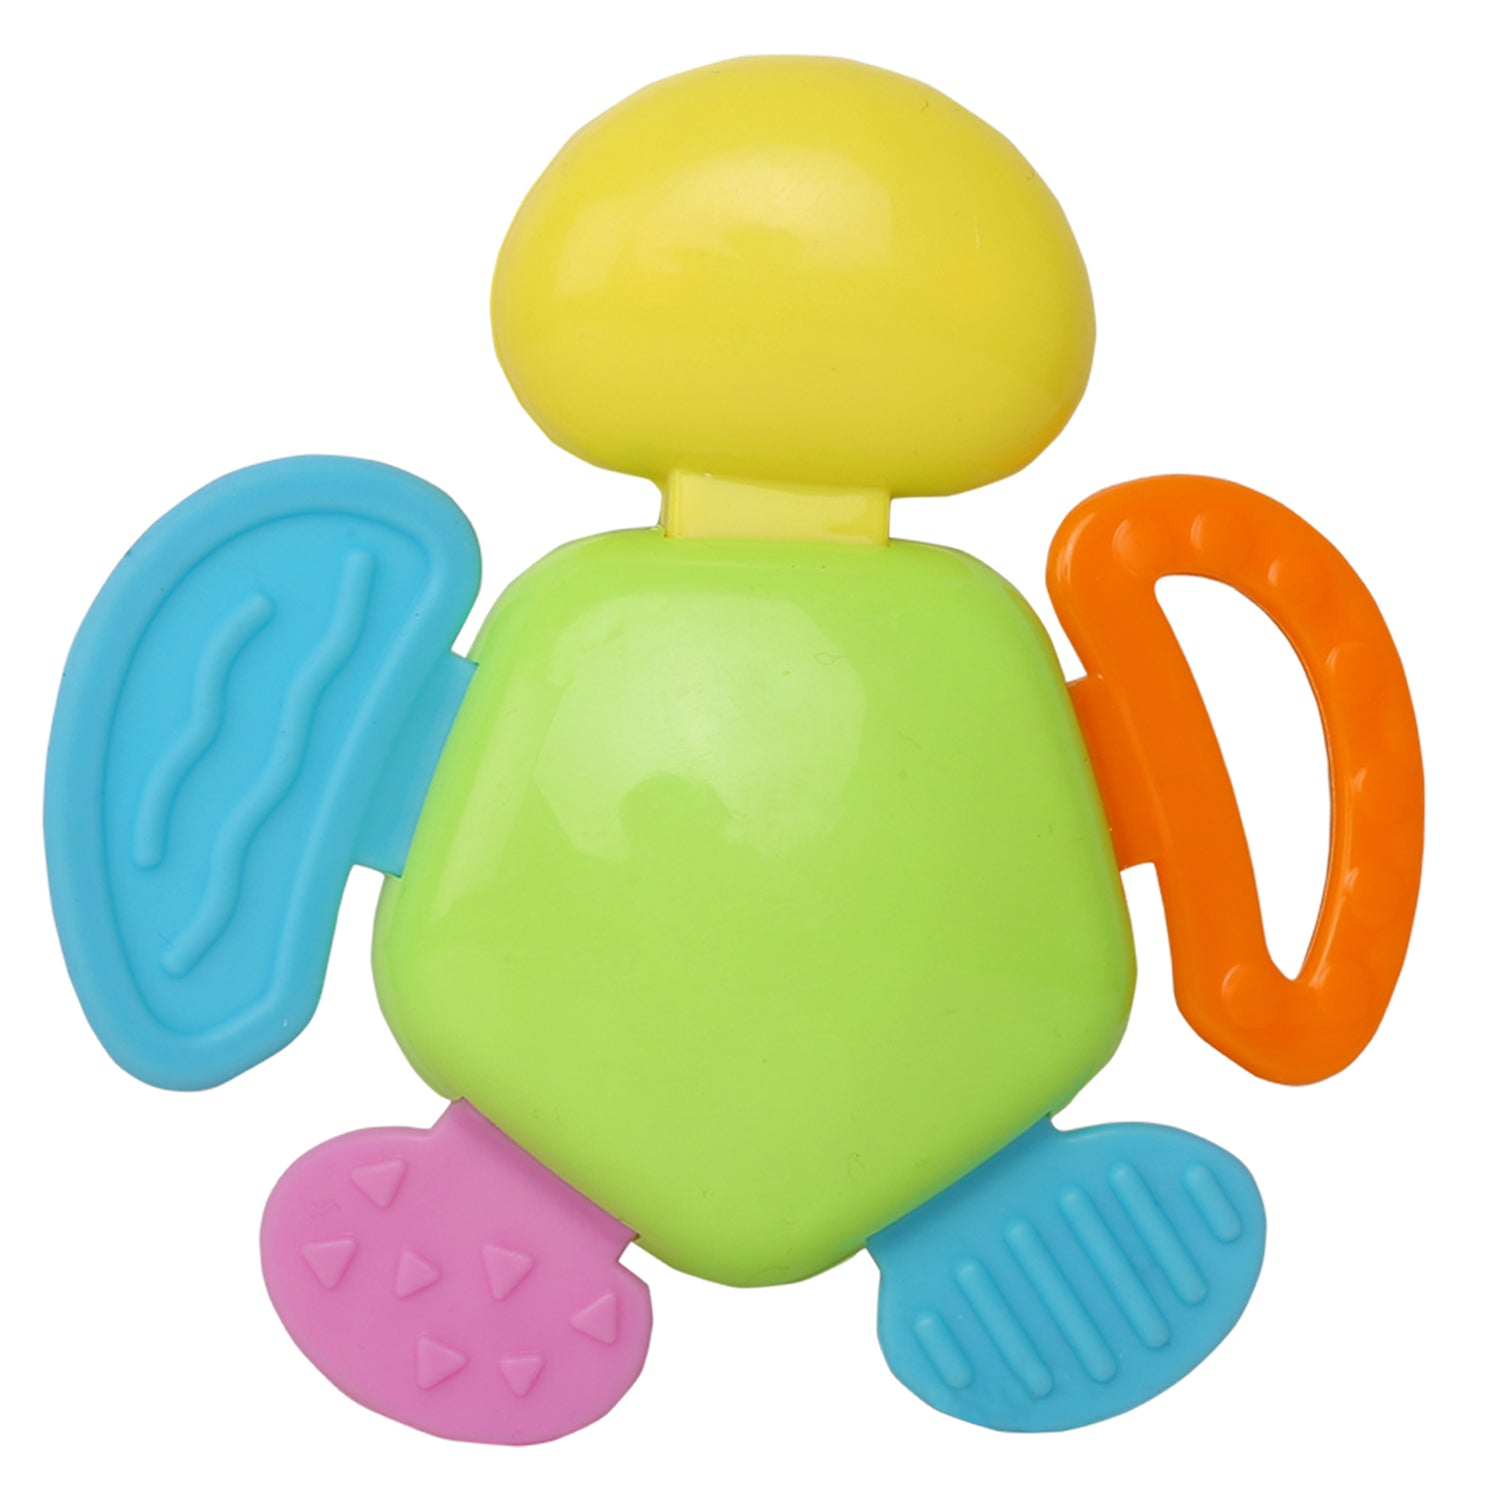 Smiley Multicolour Touch Button Rattle Toy - Baby Moo